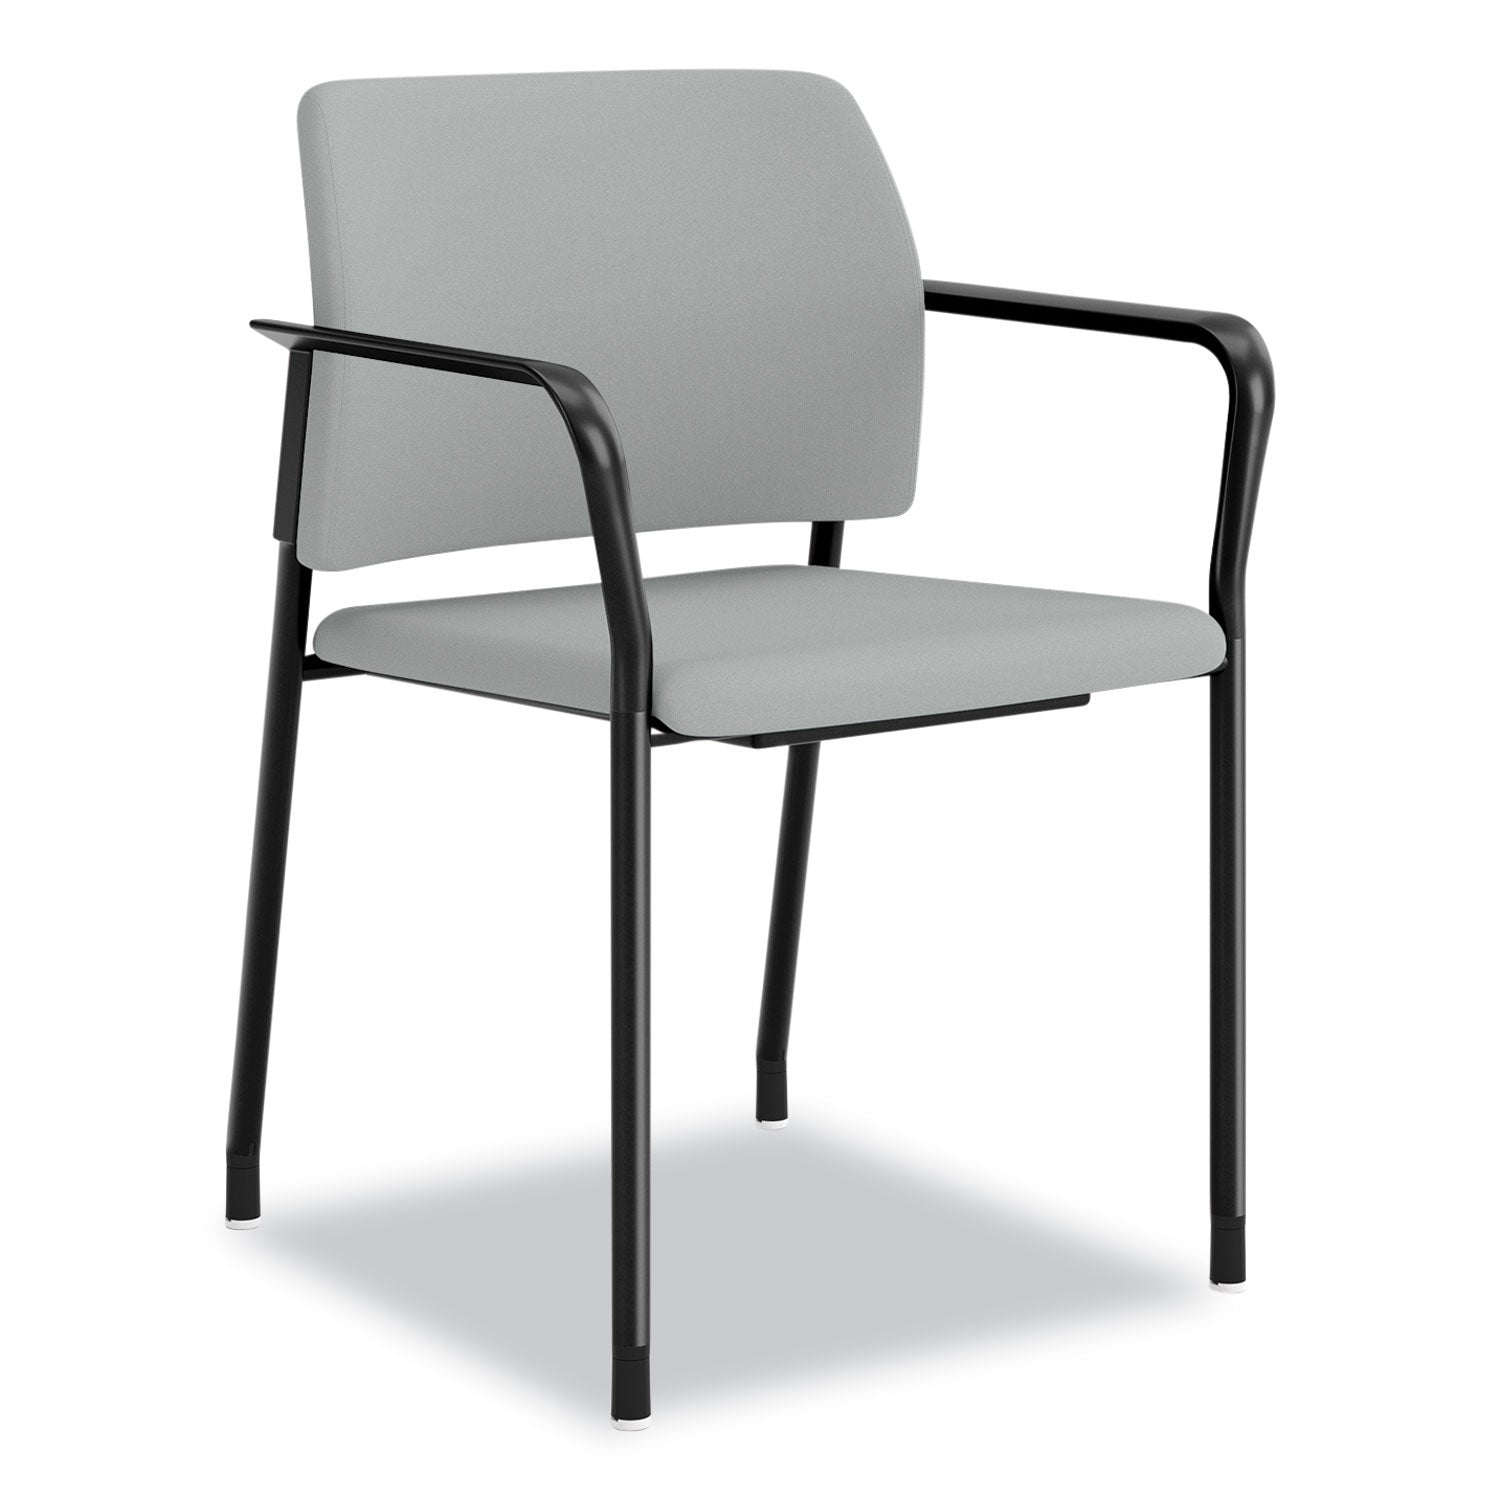 accommodate-series-guest-chair-with-arms-vinyl-upholstery-235-x-2225-x-32-flint-seat-back-charblack-legs-2-carton_honsgs6fbsx39cb - 1